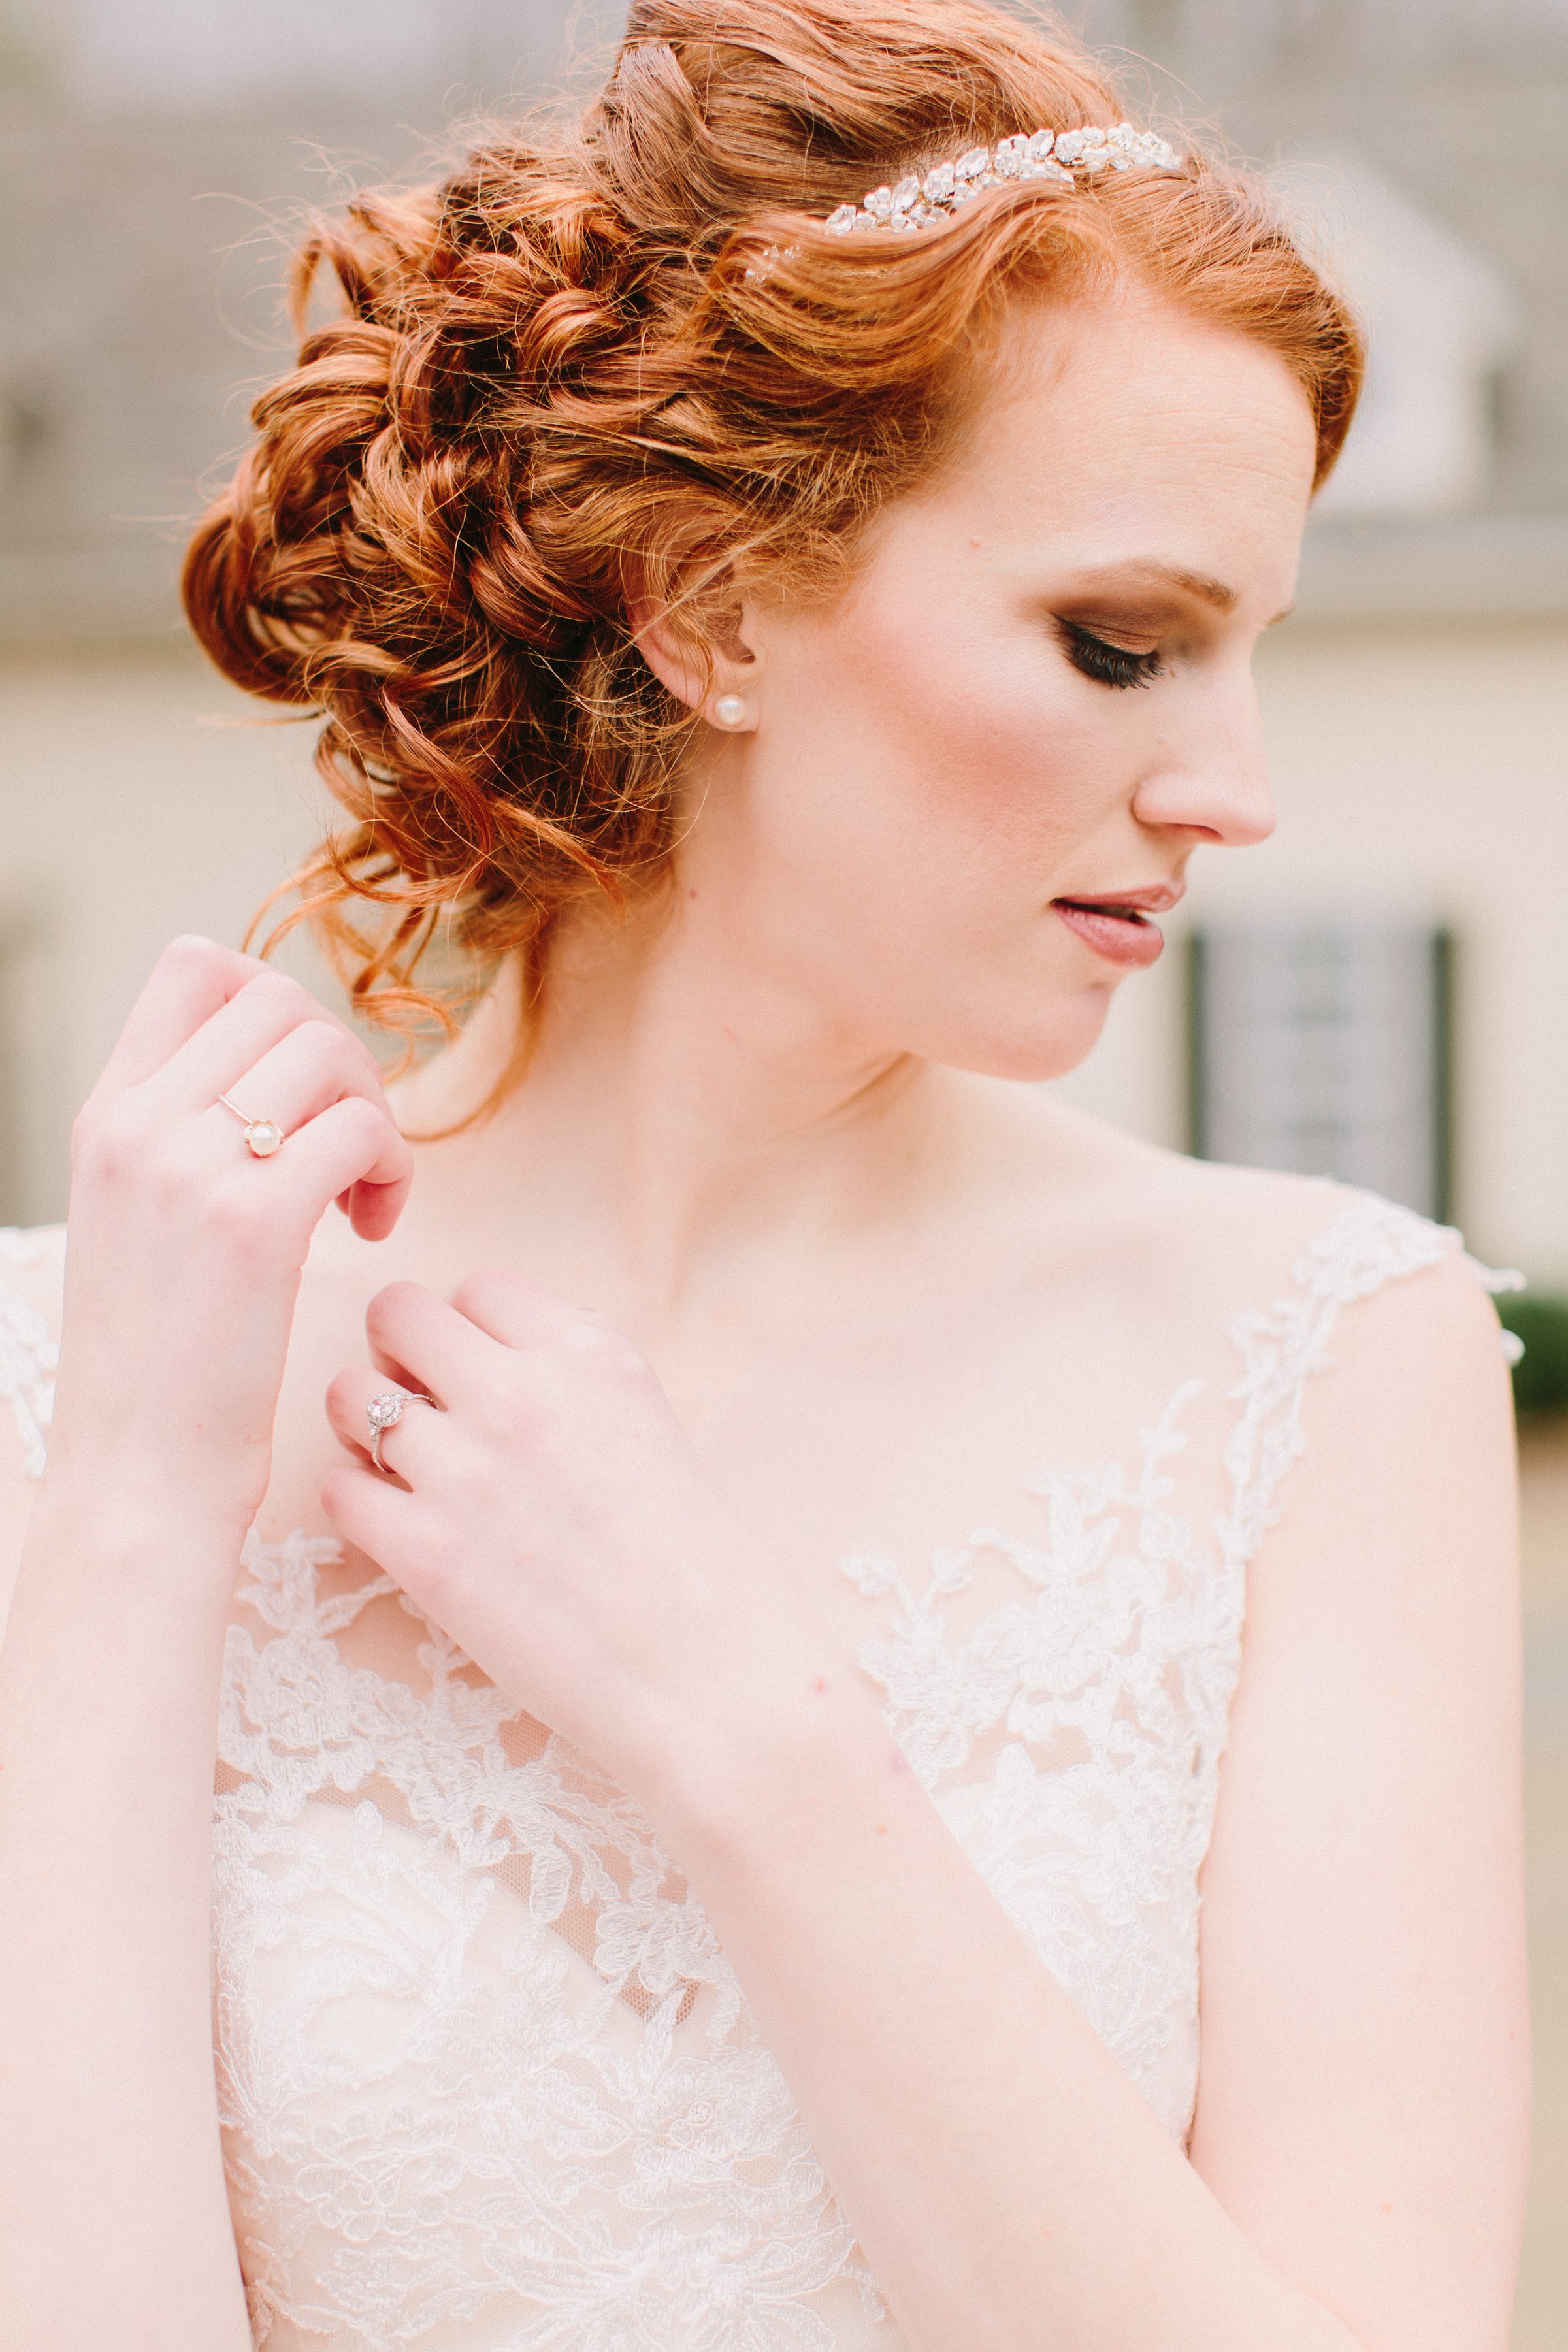 Winter Wedding Featuring Illusion Lace Wedding Dress Noelle - Meredith Sledge Photography